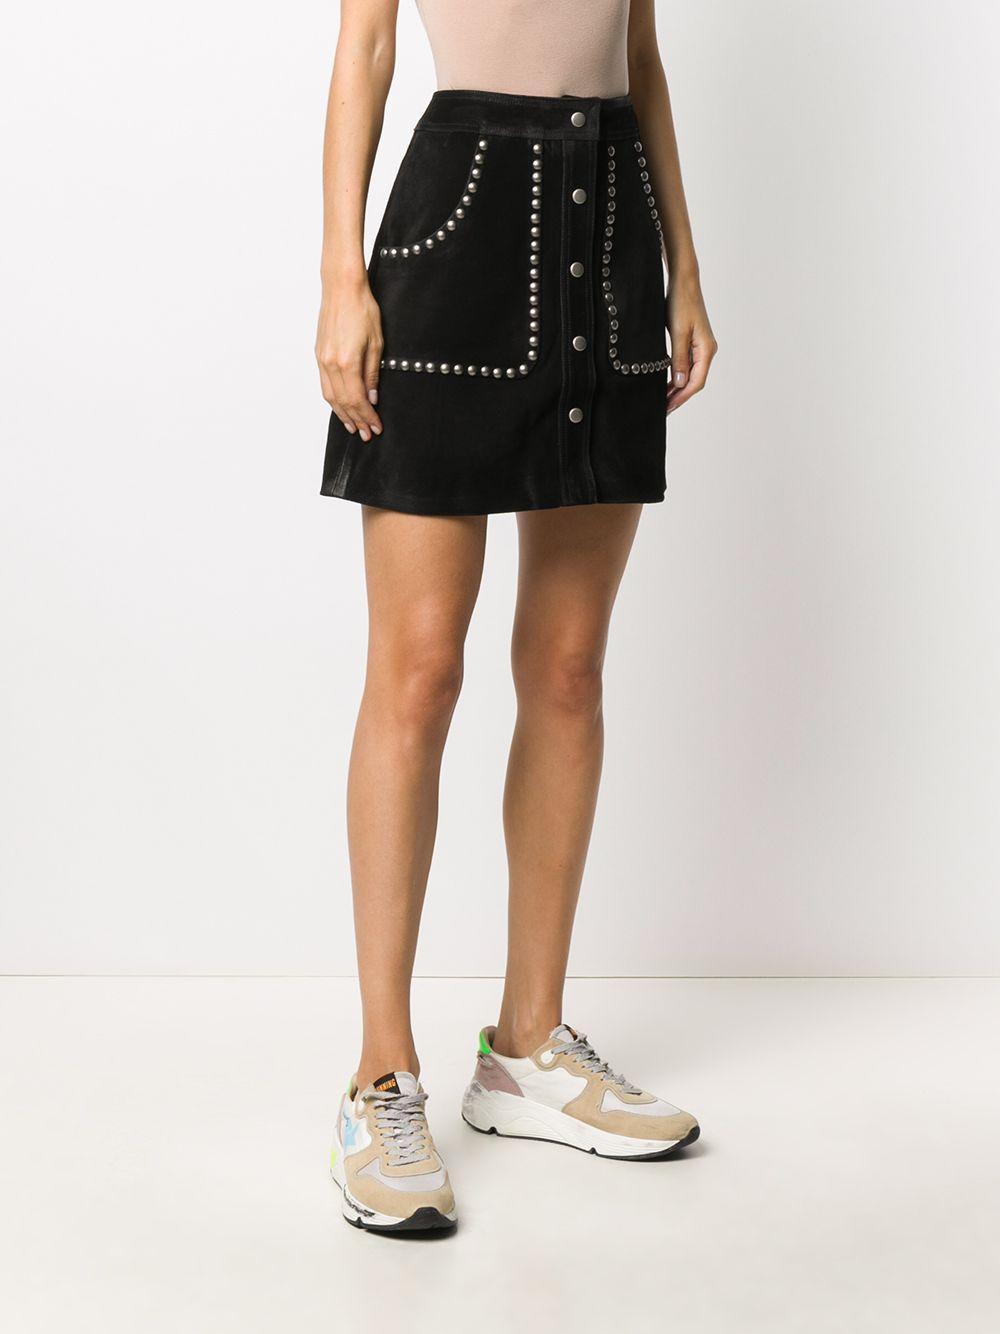 Golden Goose Deluxe Brand Leather Studded A-line Mini Skirt in Black - Lyst